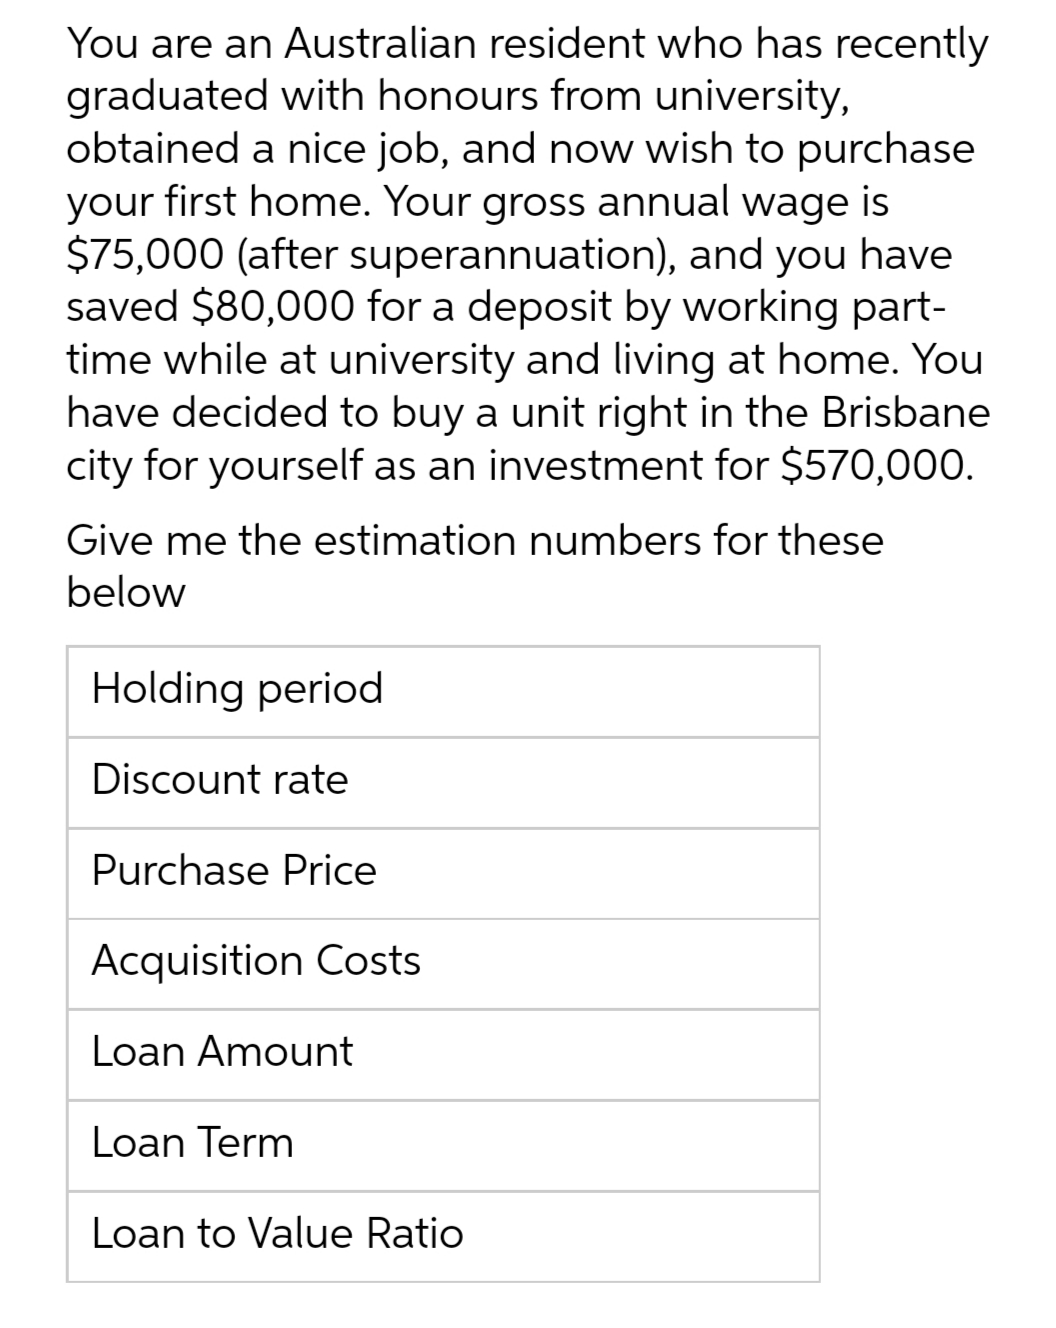 You are an Australian resident who has recently
graduated with honours from university,
obtained a nice job, and now wish to purchase
your first home. Your gross annual wage is
$75,000 (after superannuation), and you have
saved $80,000 for a deposit by working part-
time while at university and living at home. You
have decided to buy a unit right in the Brisbane
city for yourself as an investment for $570,000.
Give me the estimation numbers for these
below
Holding period
Discount rate
Purchase Price
Acquisition Costs
Loan Amount
Loan Term
Loan to Value Ratio
